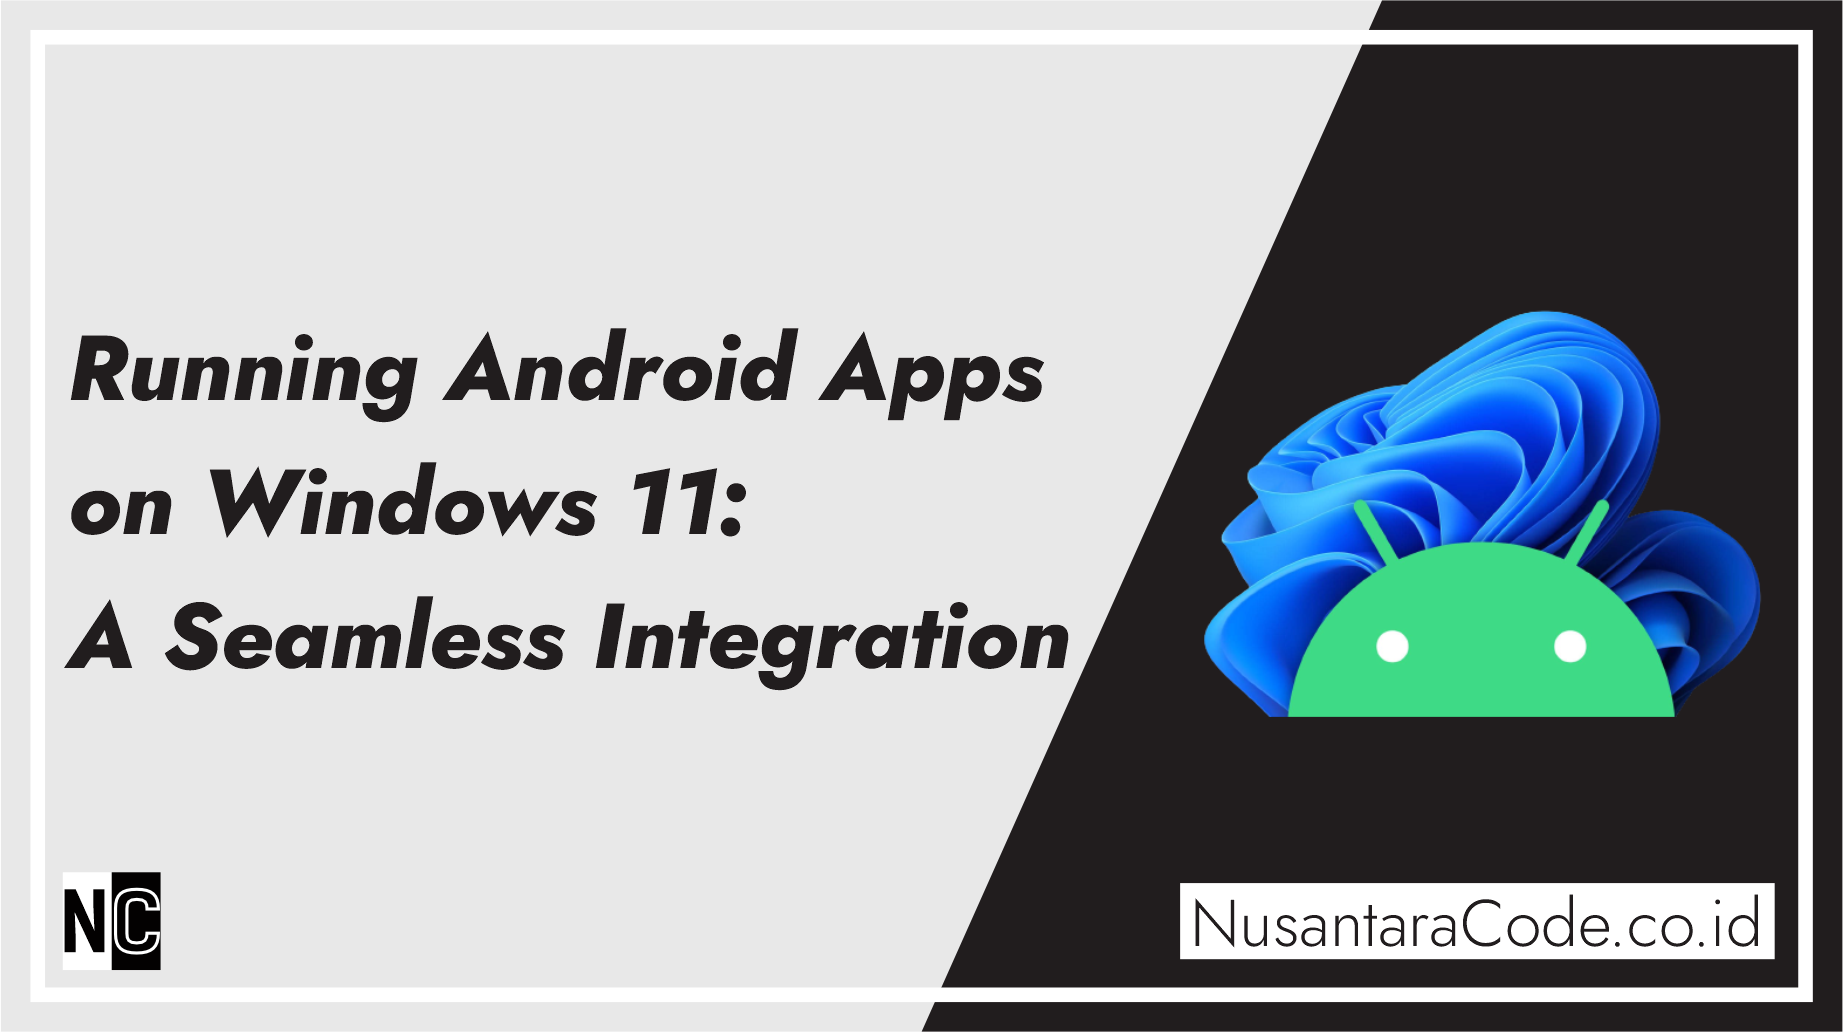 Running Android Apps on Windows 11: A Seamless Integration